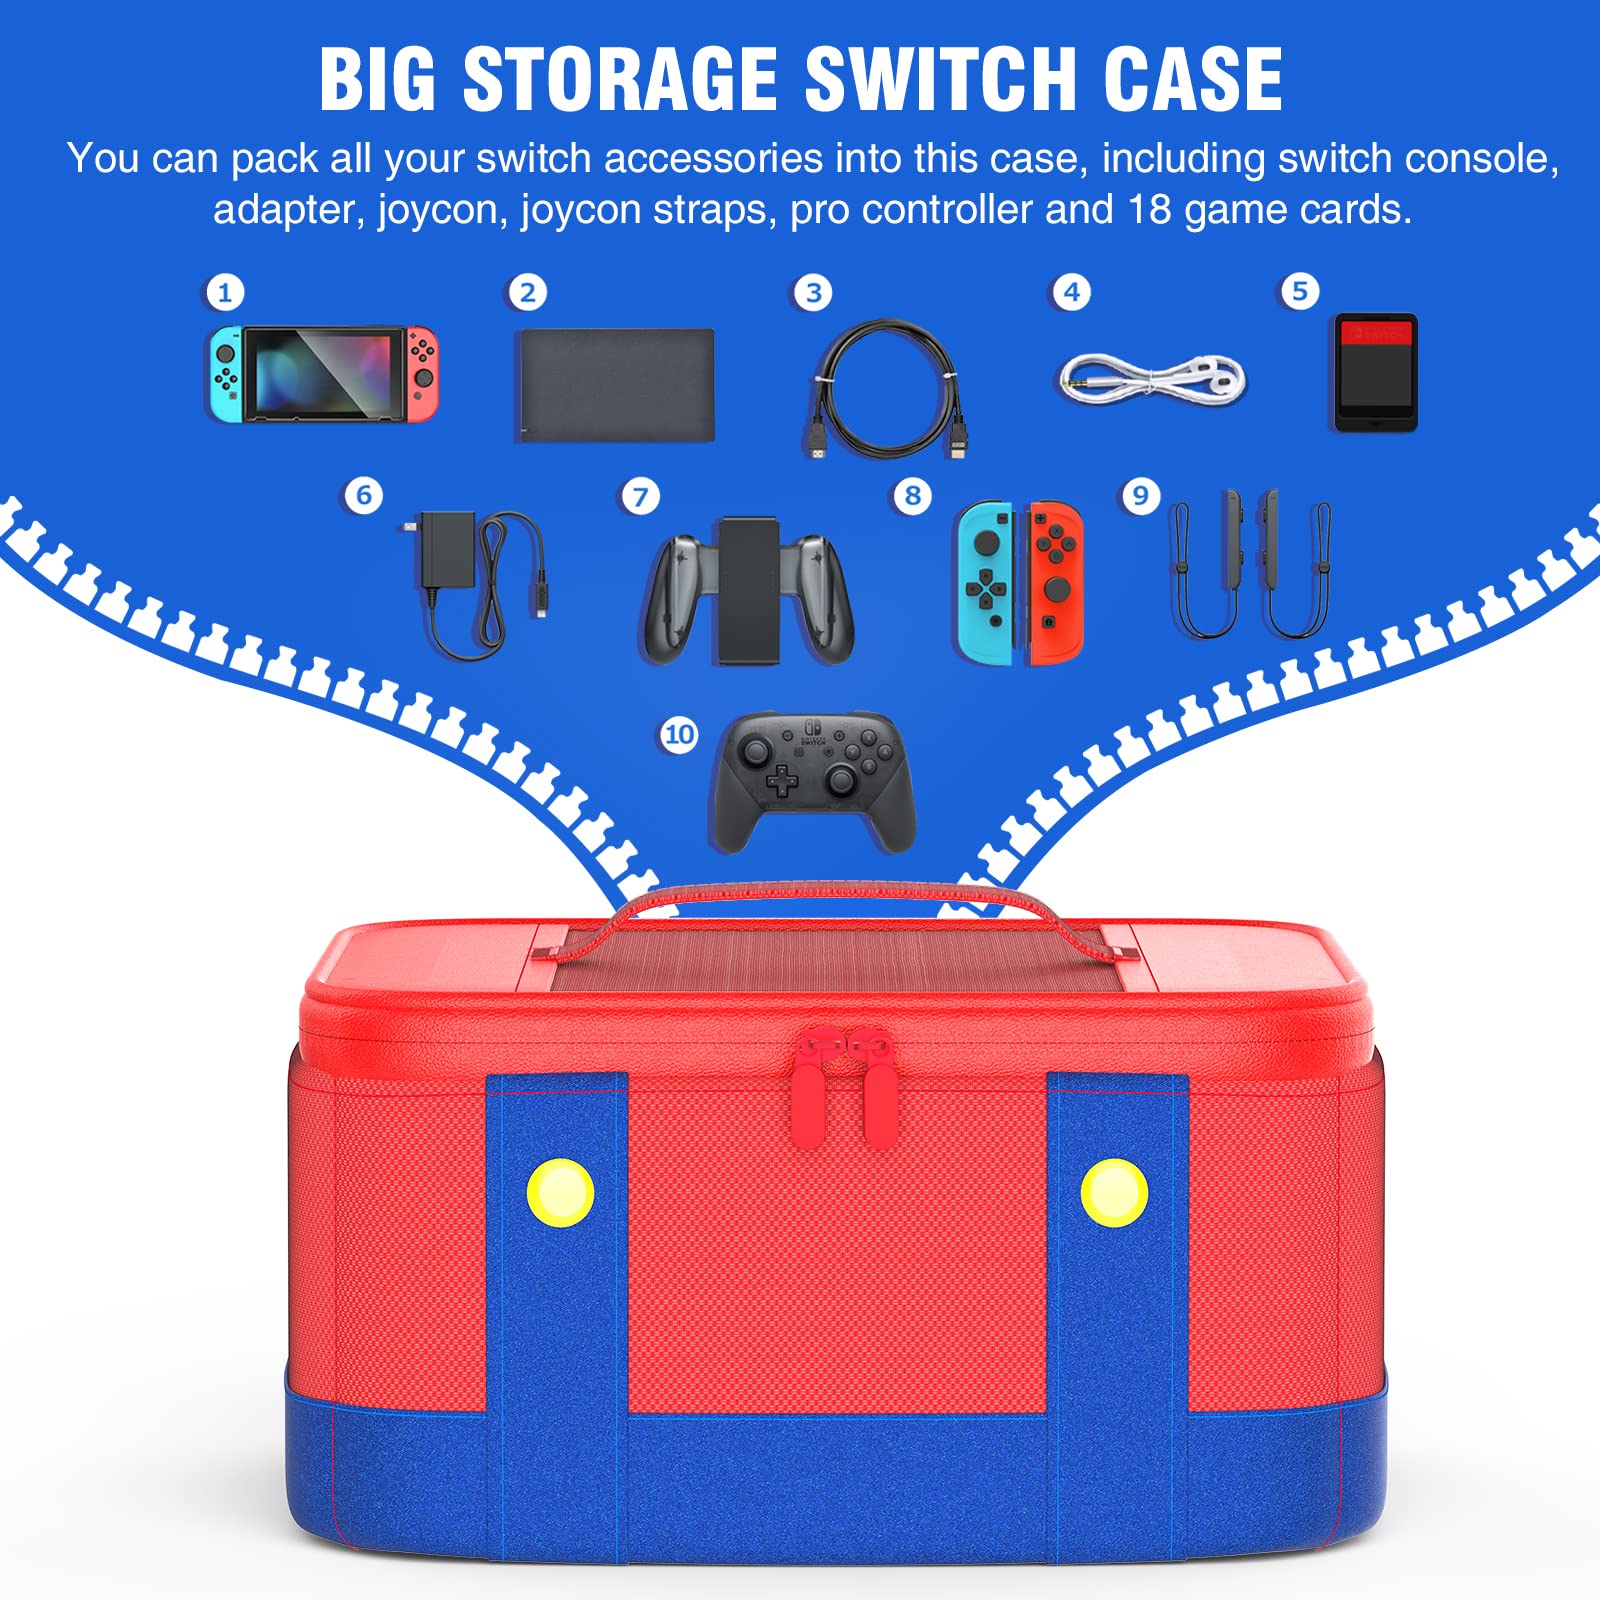 Switch Case for Switch/Switch OLED & Switch Accessories, Protection Switch Travel Case for Nintendo Switch OLED Console, Portable Switch Carrying Case Storage Messenger Bag for Boys Girls Travel Case